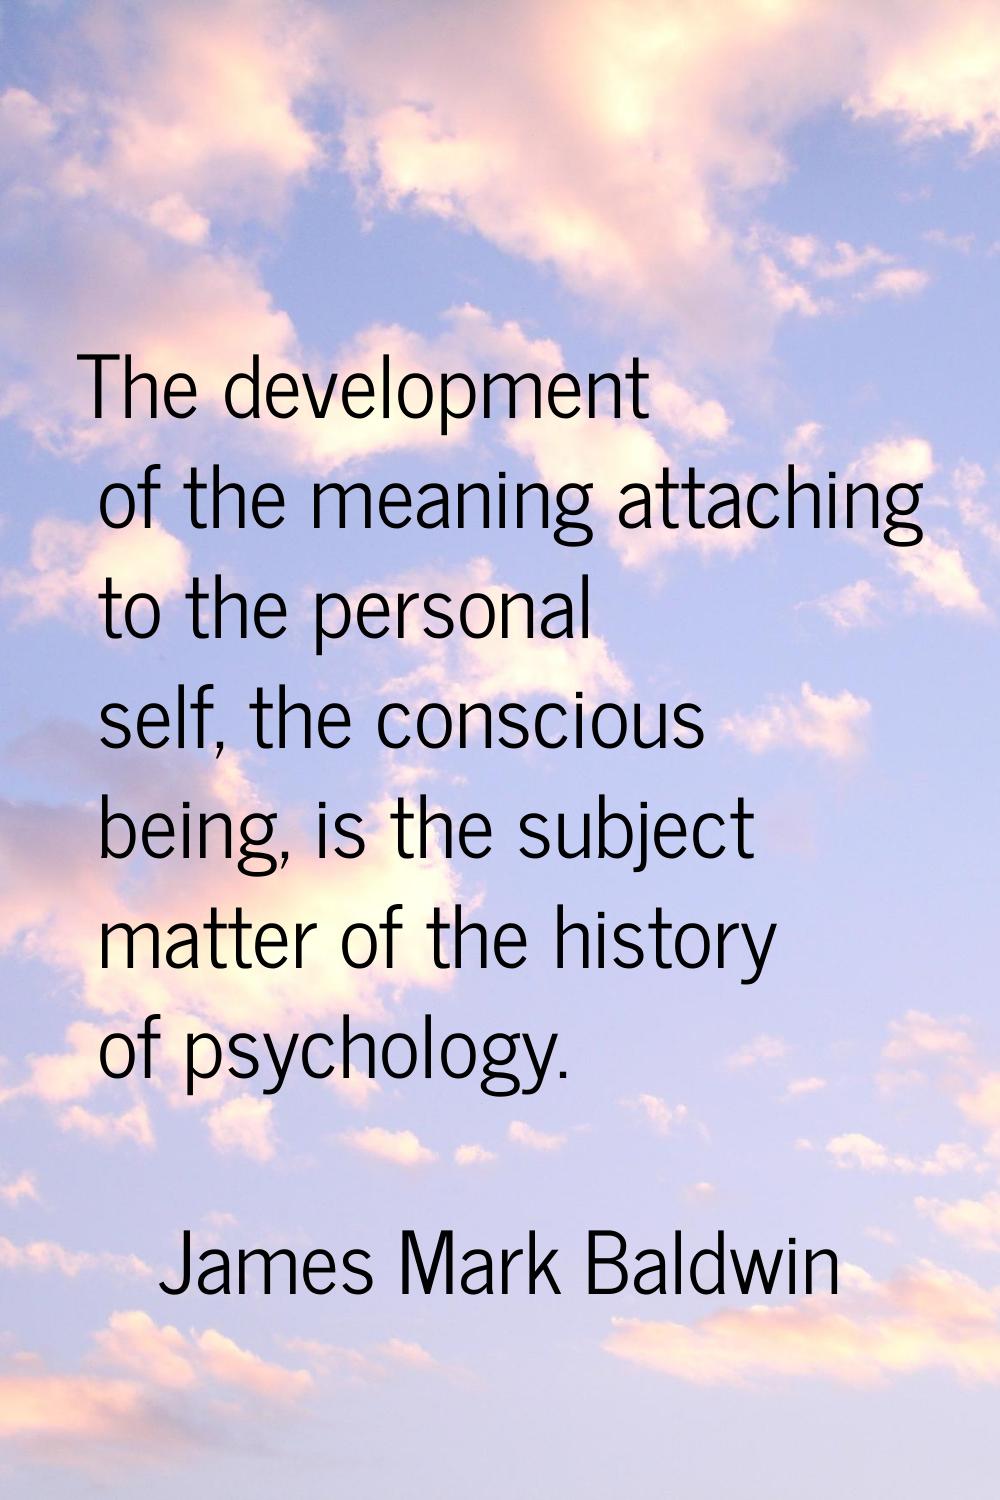 The development of the meaning attaching to the personal self, the conscious being, is the subject 